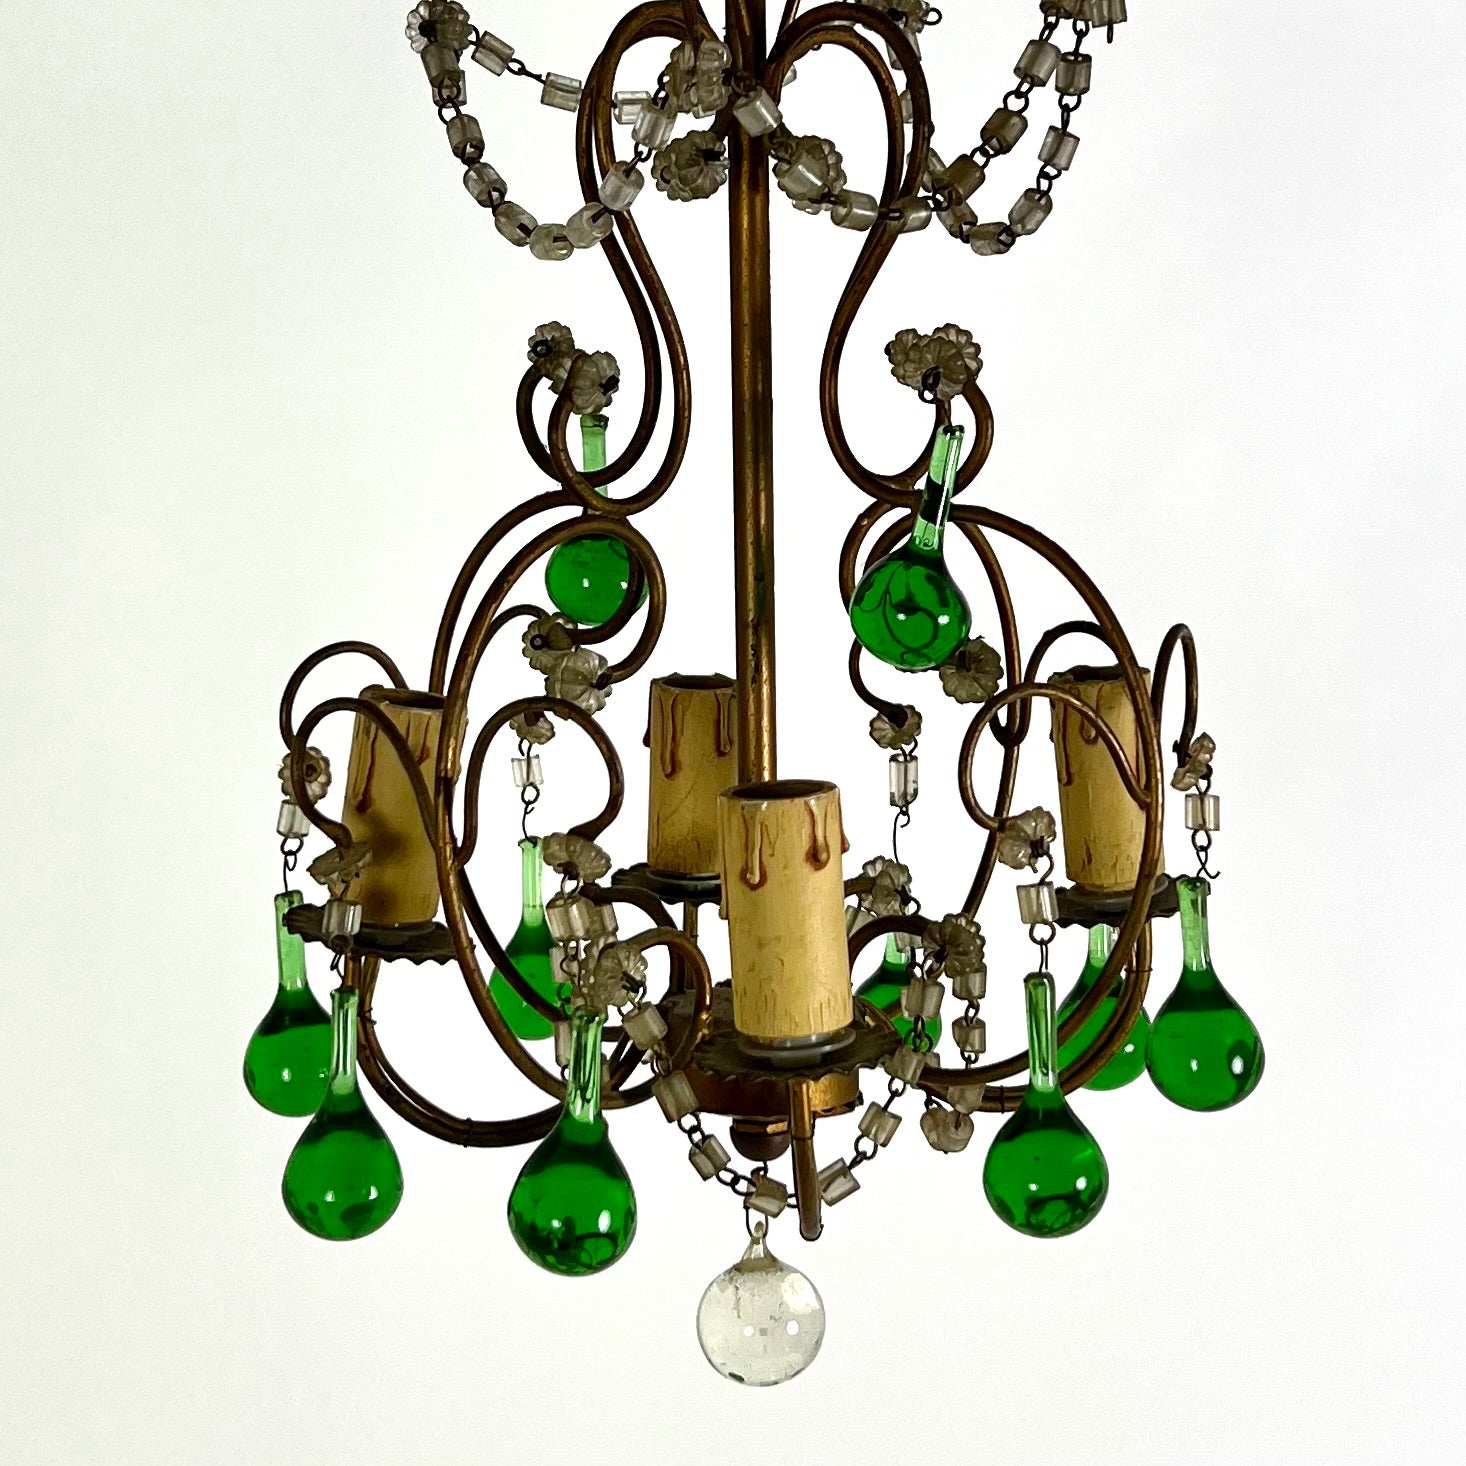 Small elegant vintage Italian chandelier with green glass drops.